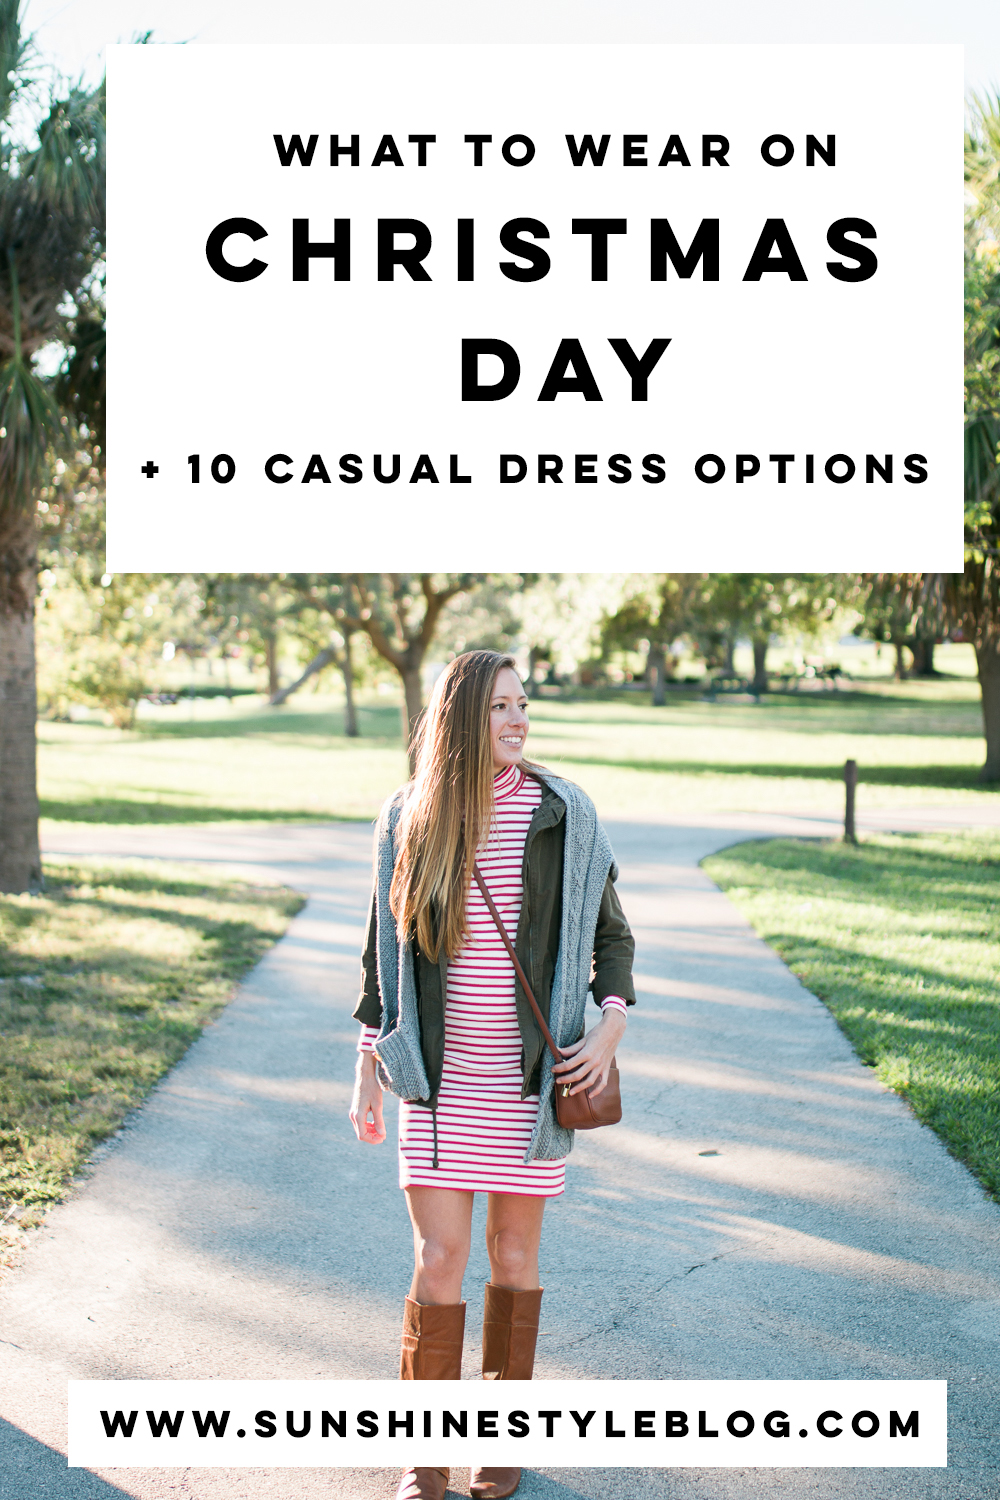 10 Casual Dress Options to Wear on Christmas Day